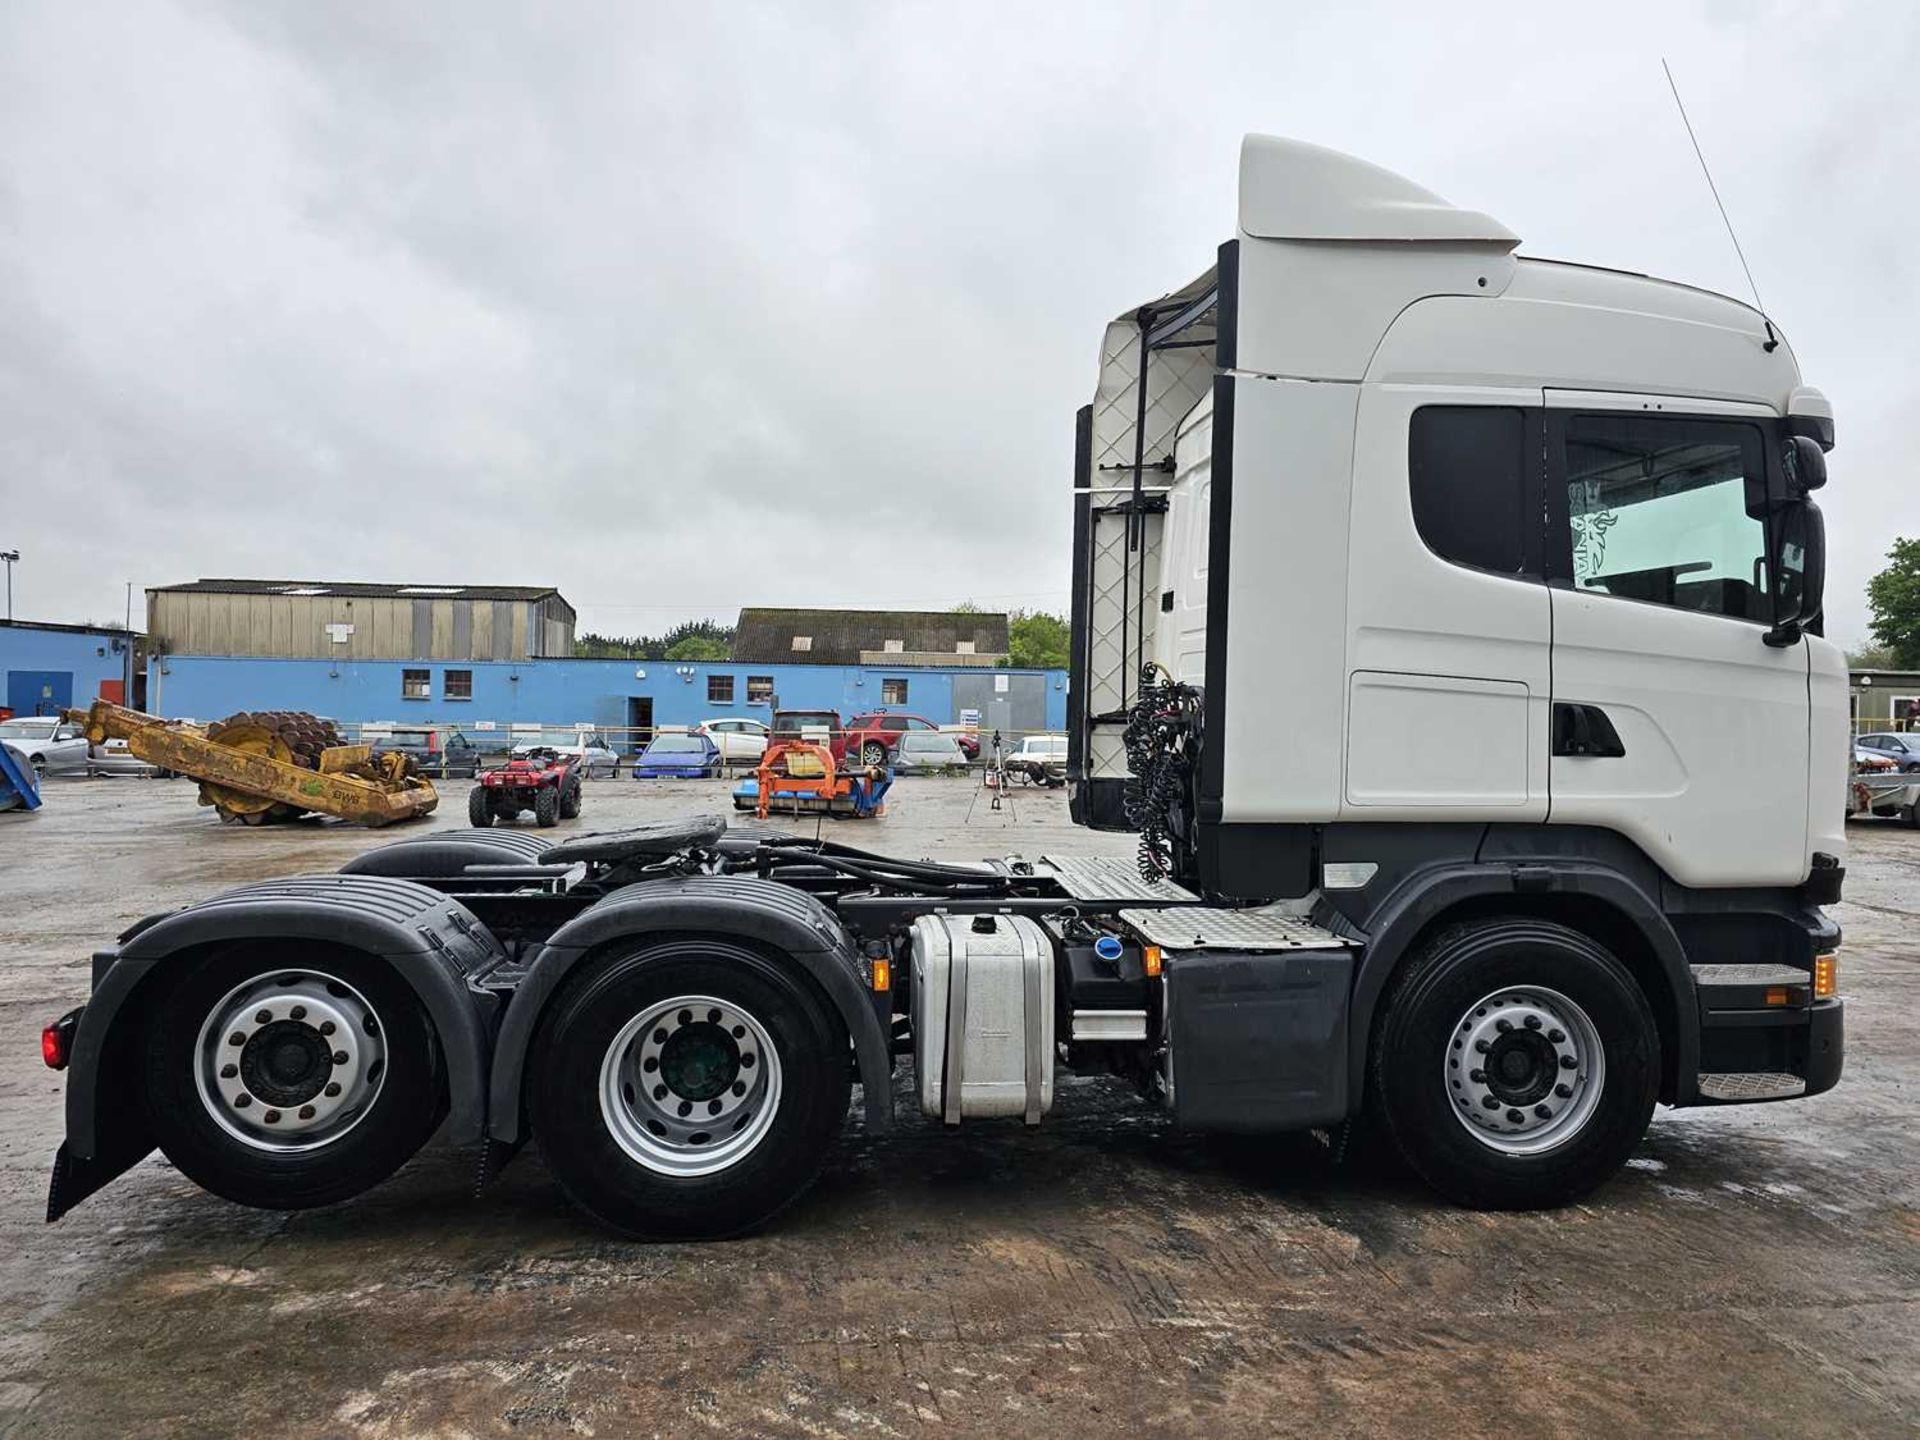 2014 Scania R450 6x2 Rear Lift, Tipping Gear, Blind Spot Camera, A/C, Automatic Gearbox - Image 6 of 22